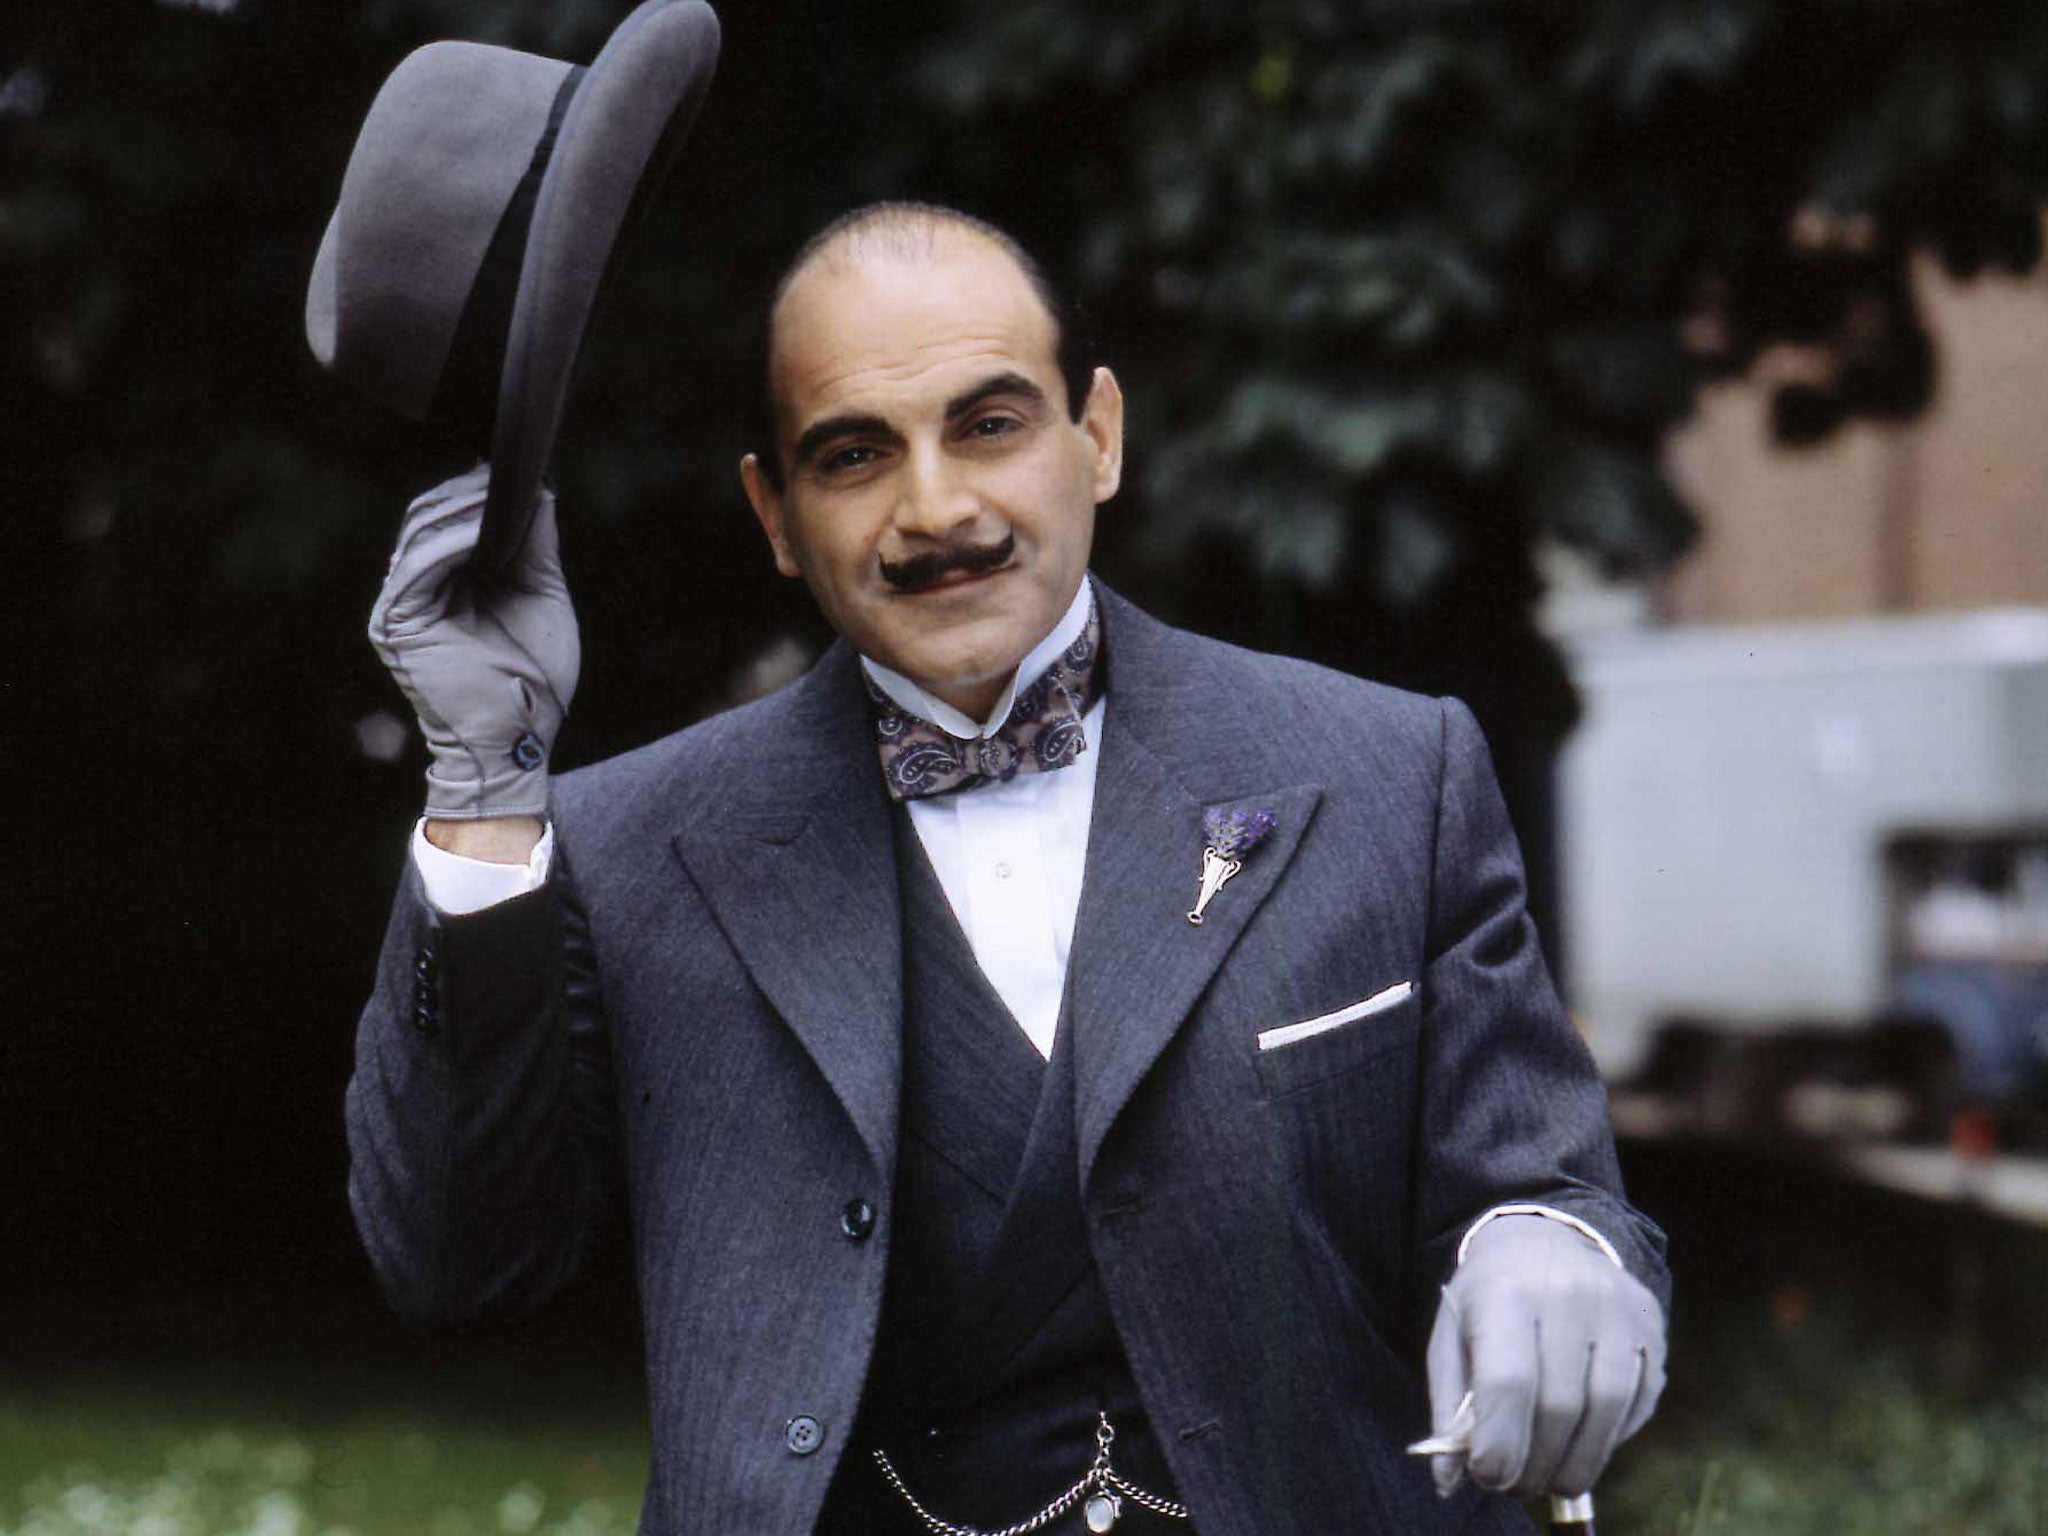 Agatha Christie became famous for her detective characters such as Hercule Poirot